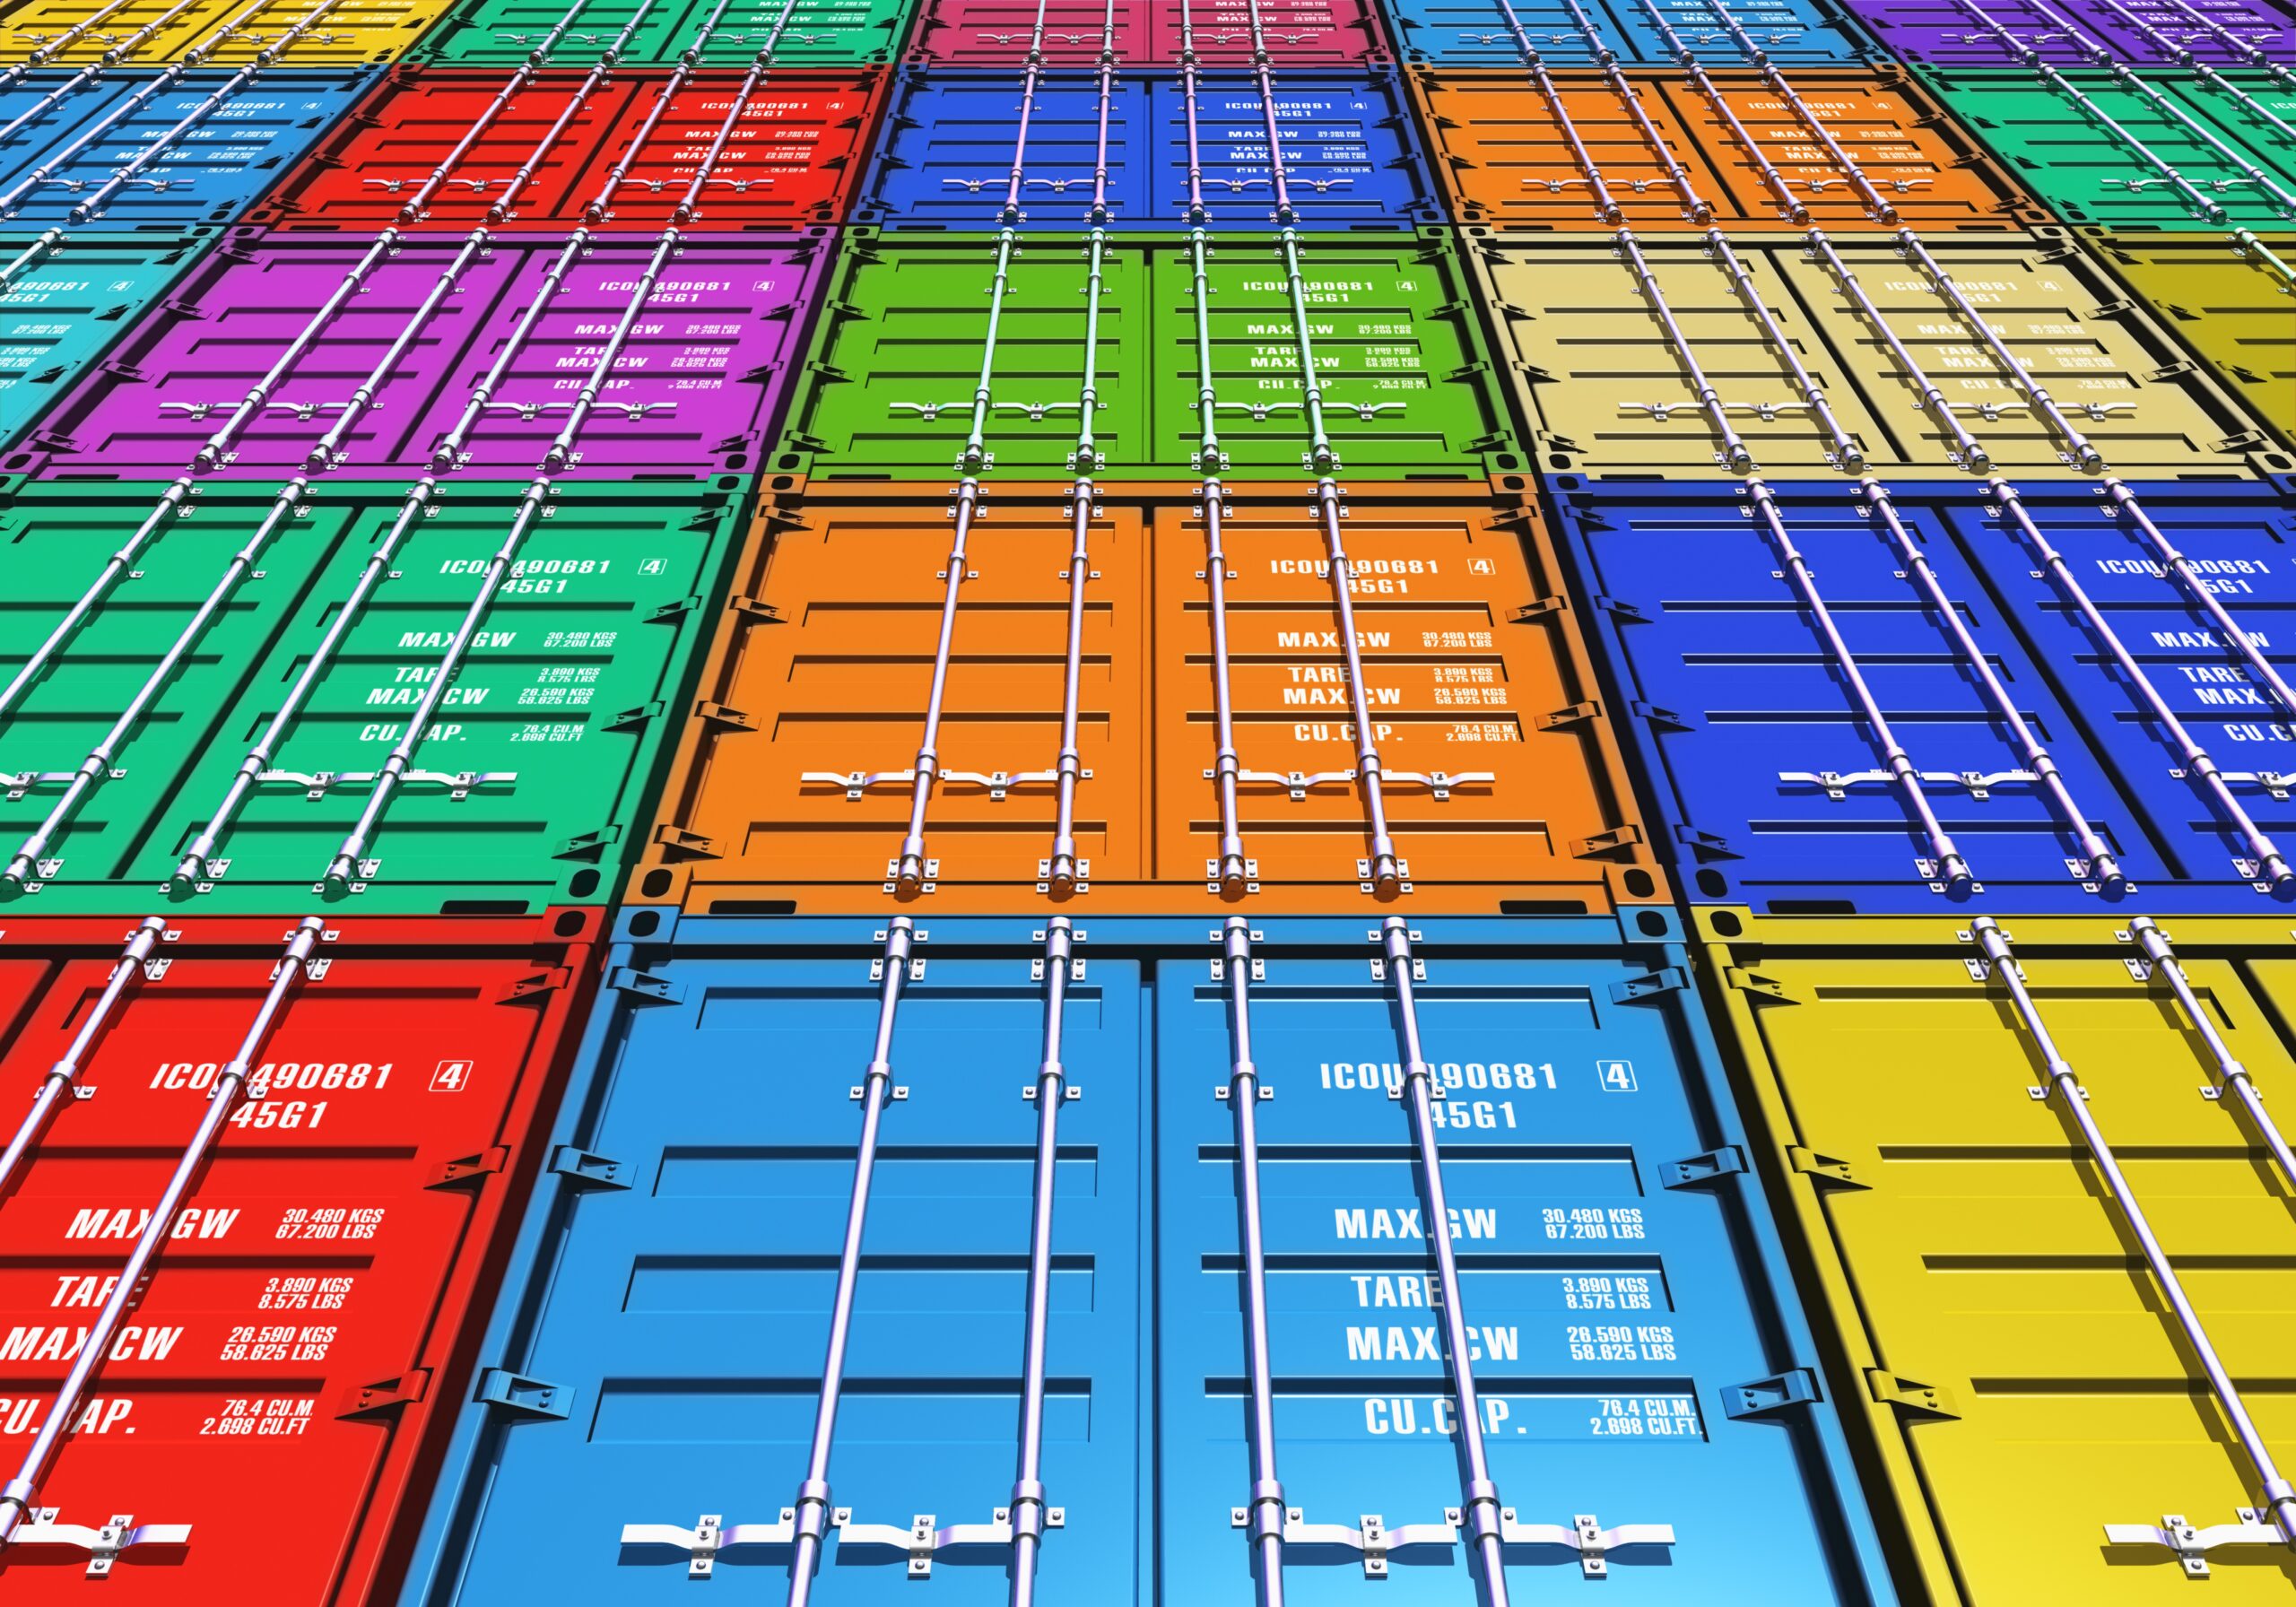 an image of freight containers waiting at a port